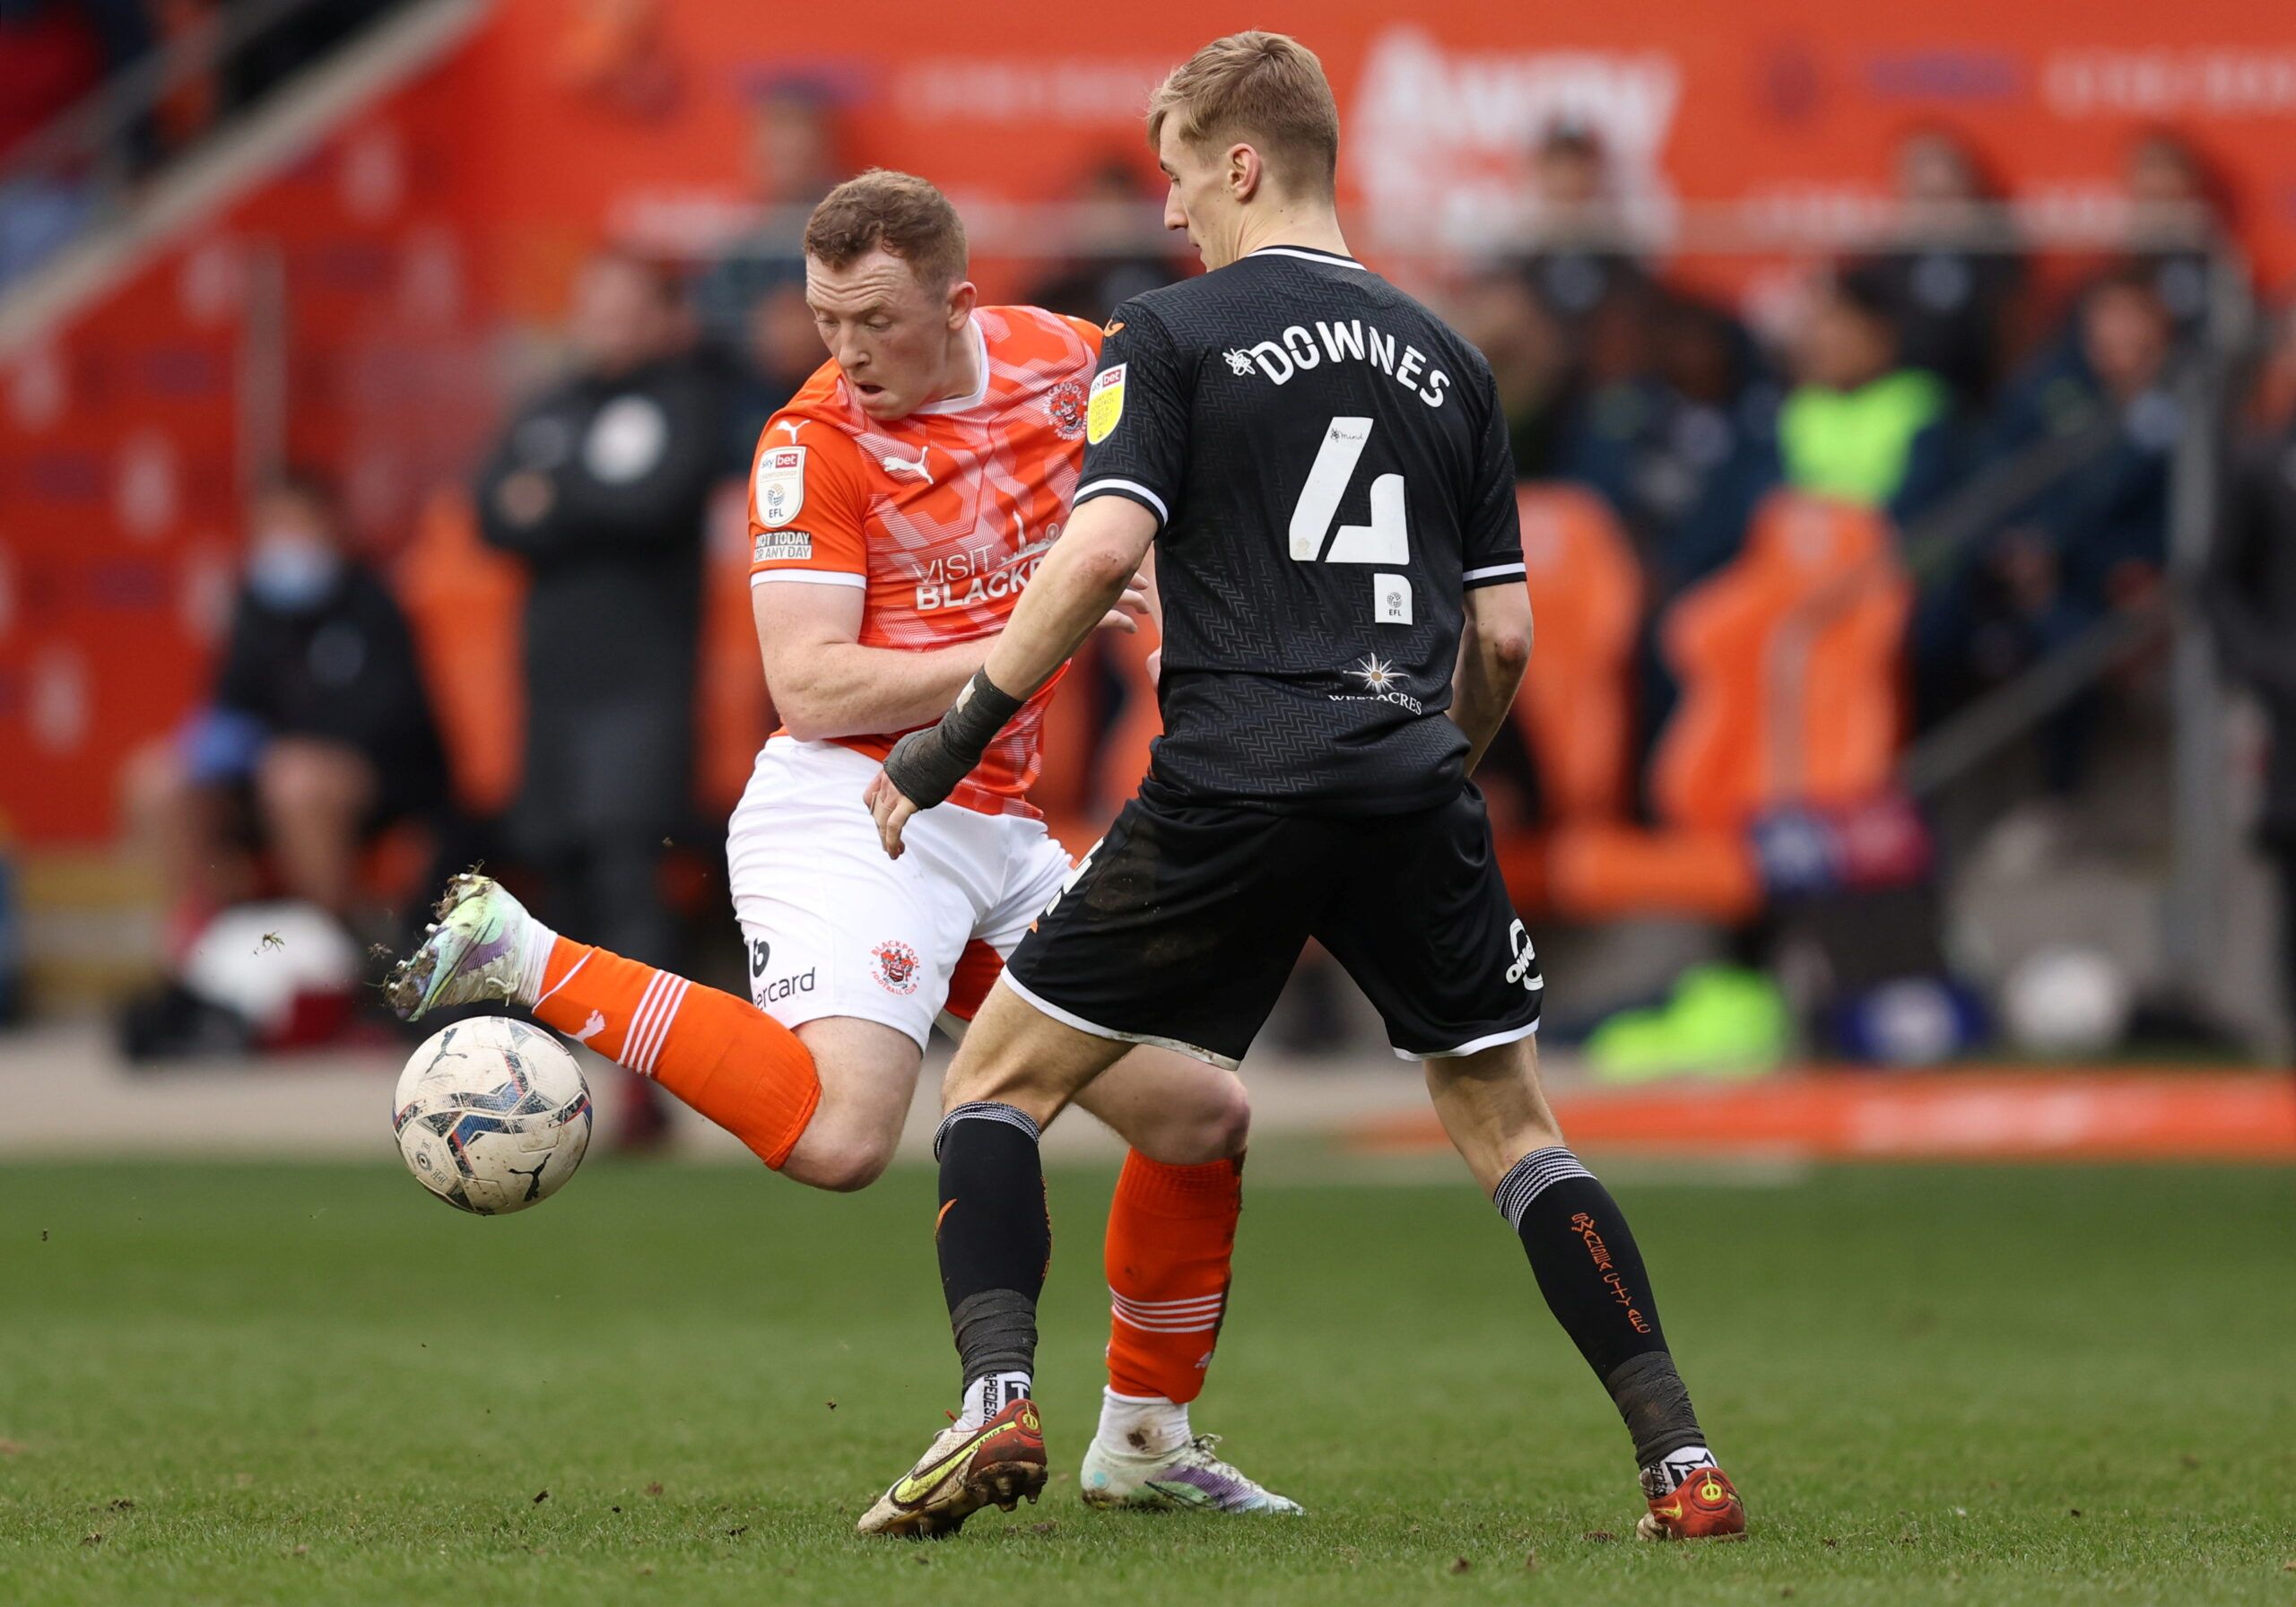 Soccer Football - Championship - Blackpool v Swansea City - Bloomfield Road, Blackpool , Britain - March 12, 2022  Blackpool's Shayne Lavery in action with Swansea City's Flynn Downes  Action Images/John Clifton  EDITORIAL USE ONLY. No use with unauthorized audio, video, data, fixture lists, club/league logos or 